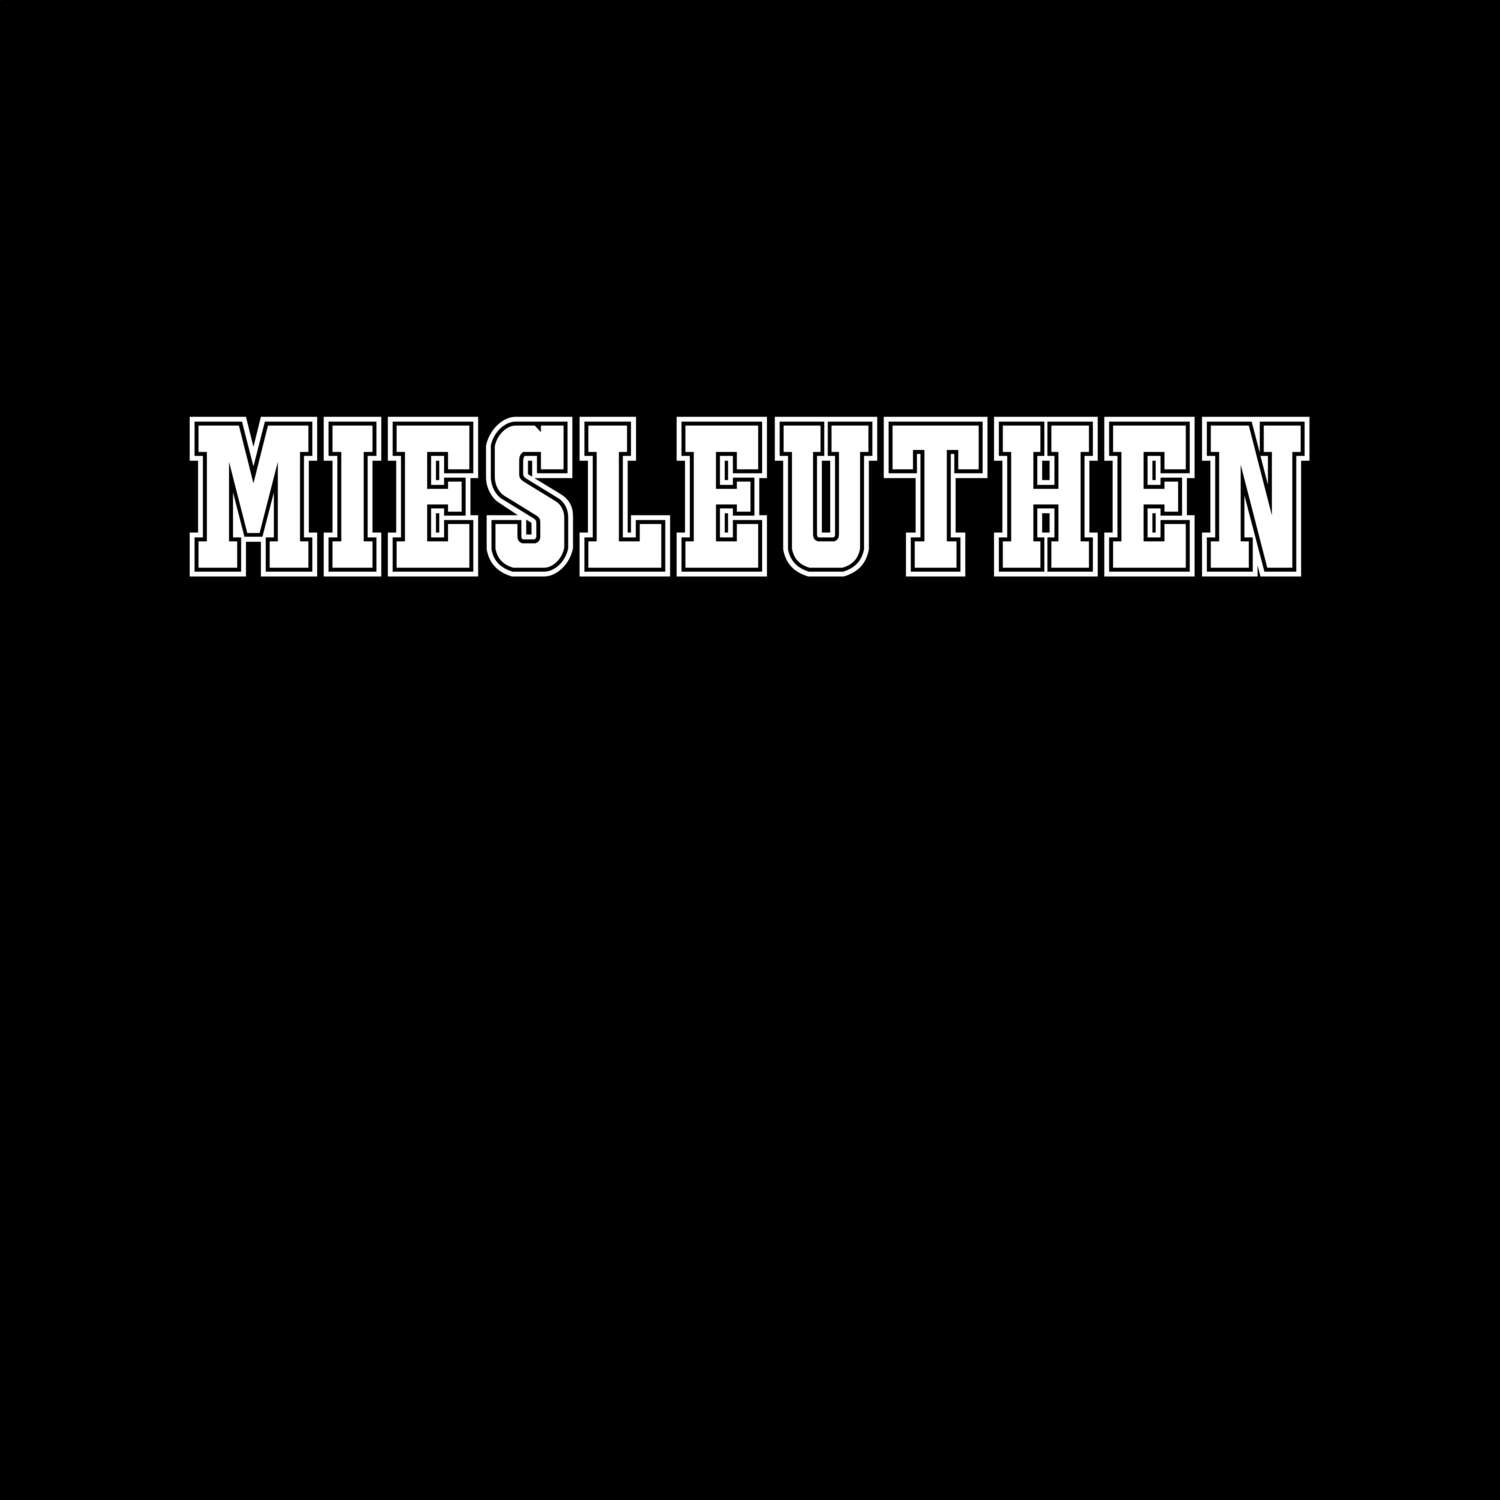 Miesleuthen T-Shirt »Classic«